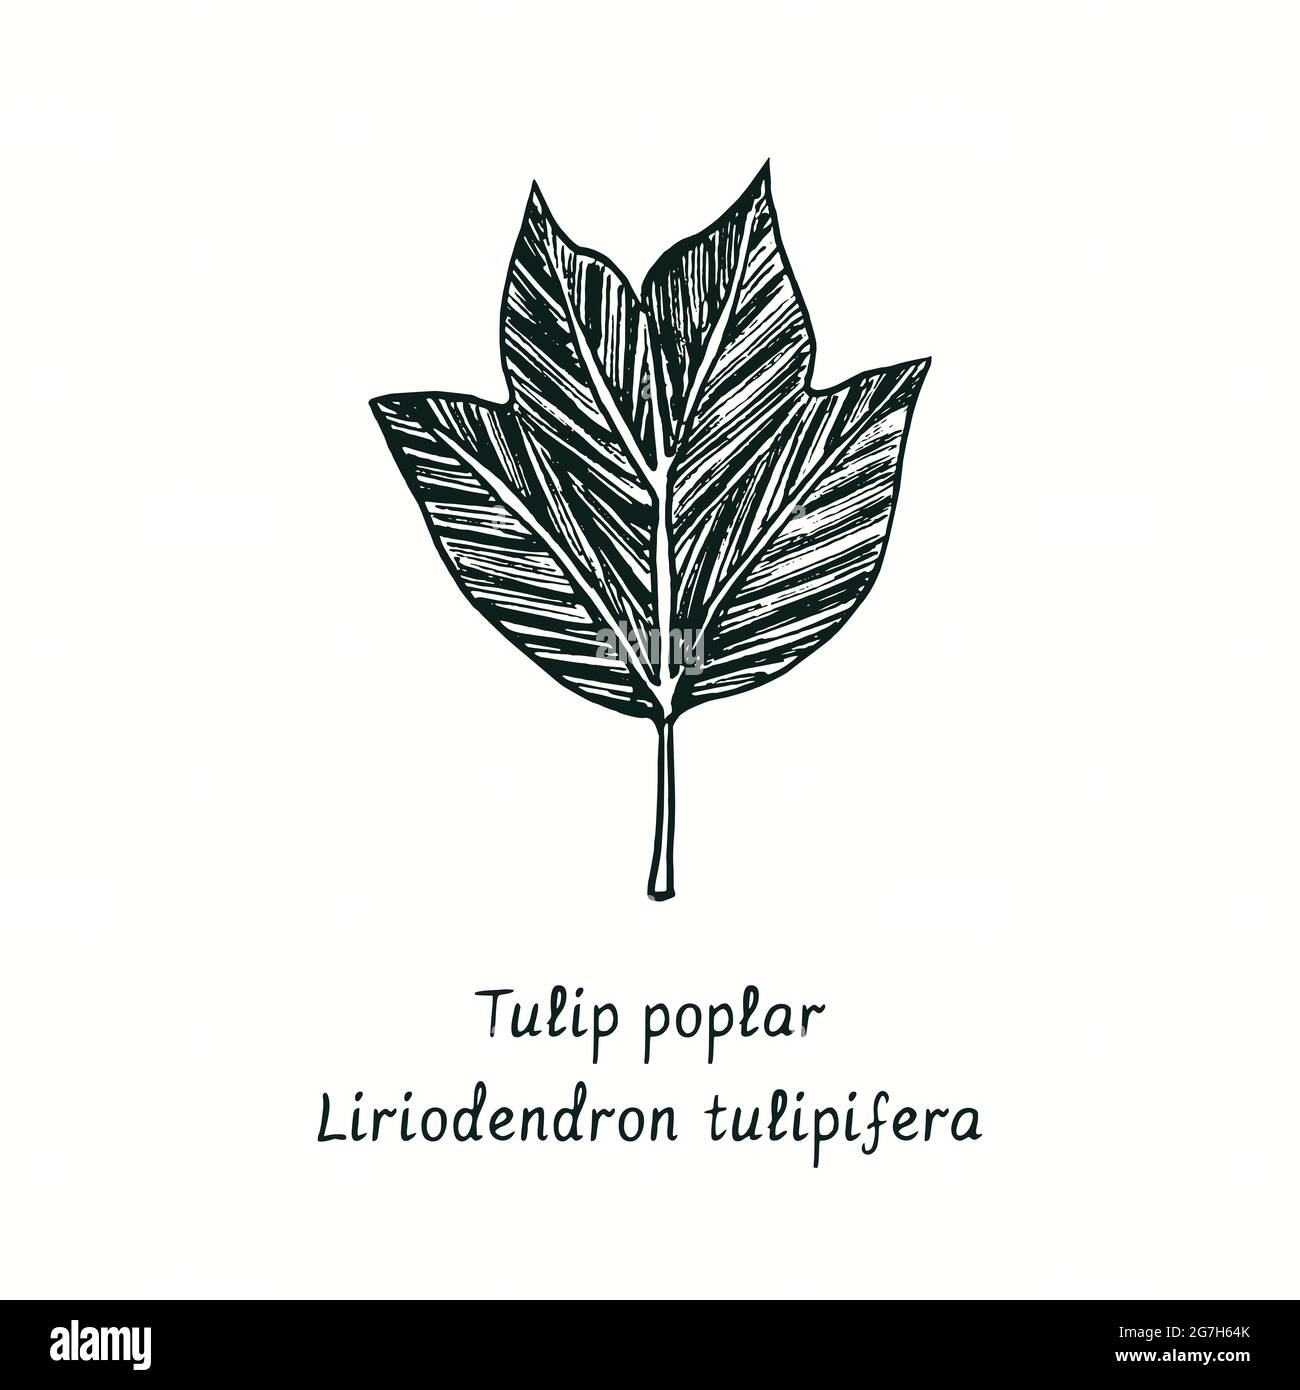 Tulip poplar (Liriodendron tulipifera) leaf. Ink black and white doodle drawing in woodcut style. Stock Photo